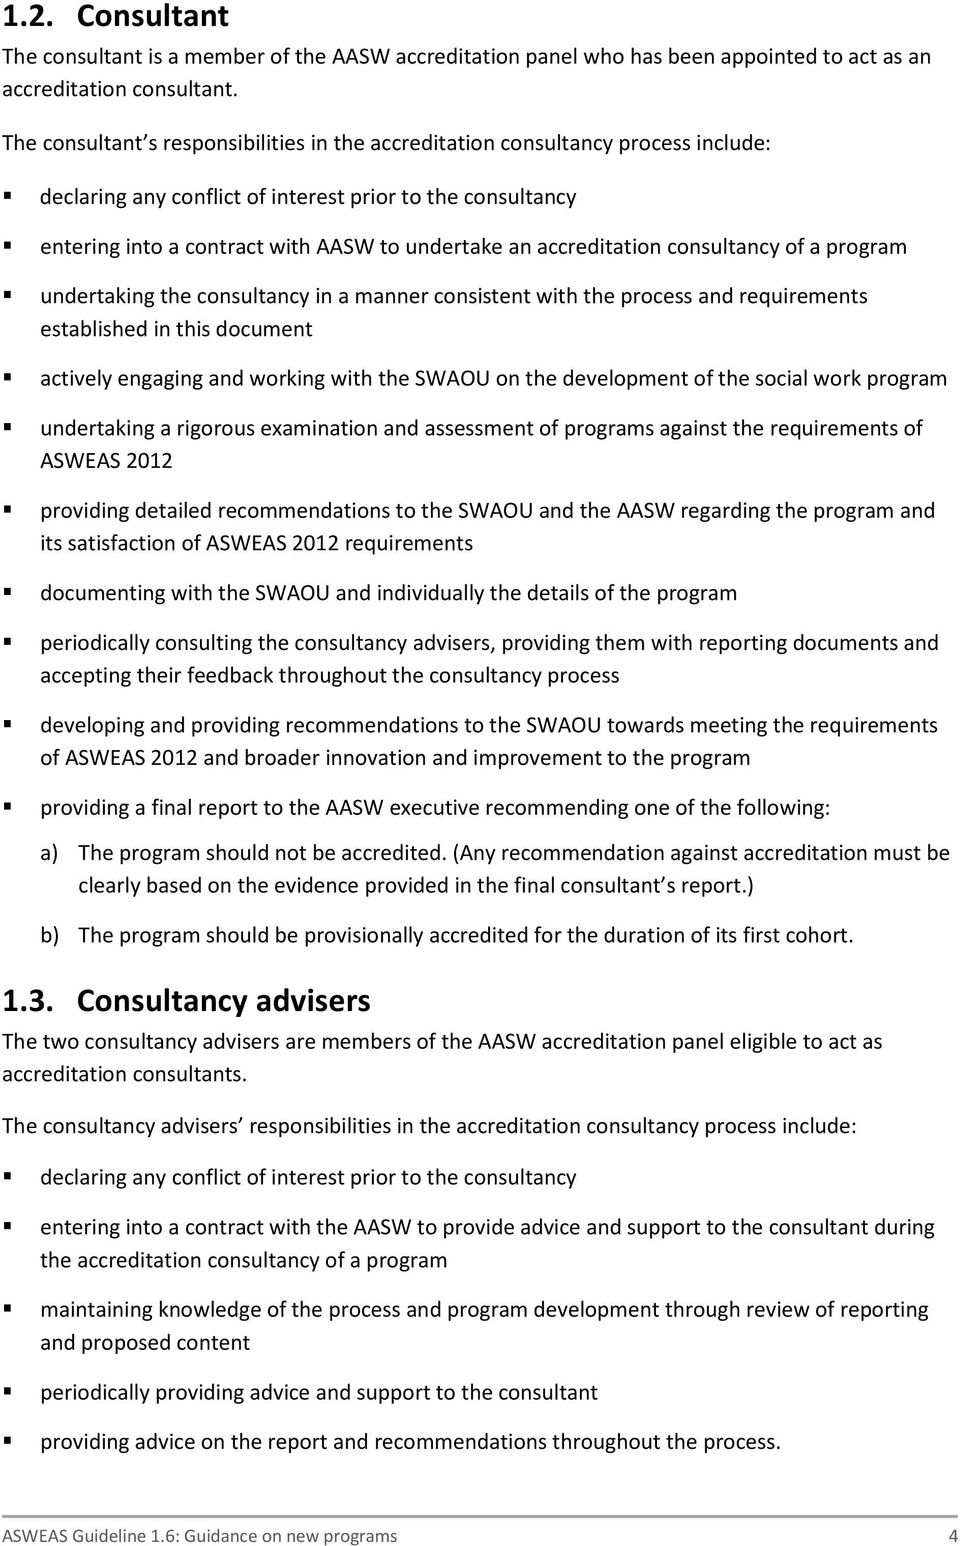 accreditation consultancy of a program undertaking the consultancy in a manner consistent with the process and requirements established in this document actively engaging and working with the SWAOU